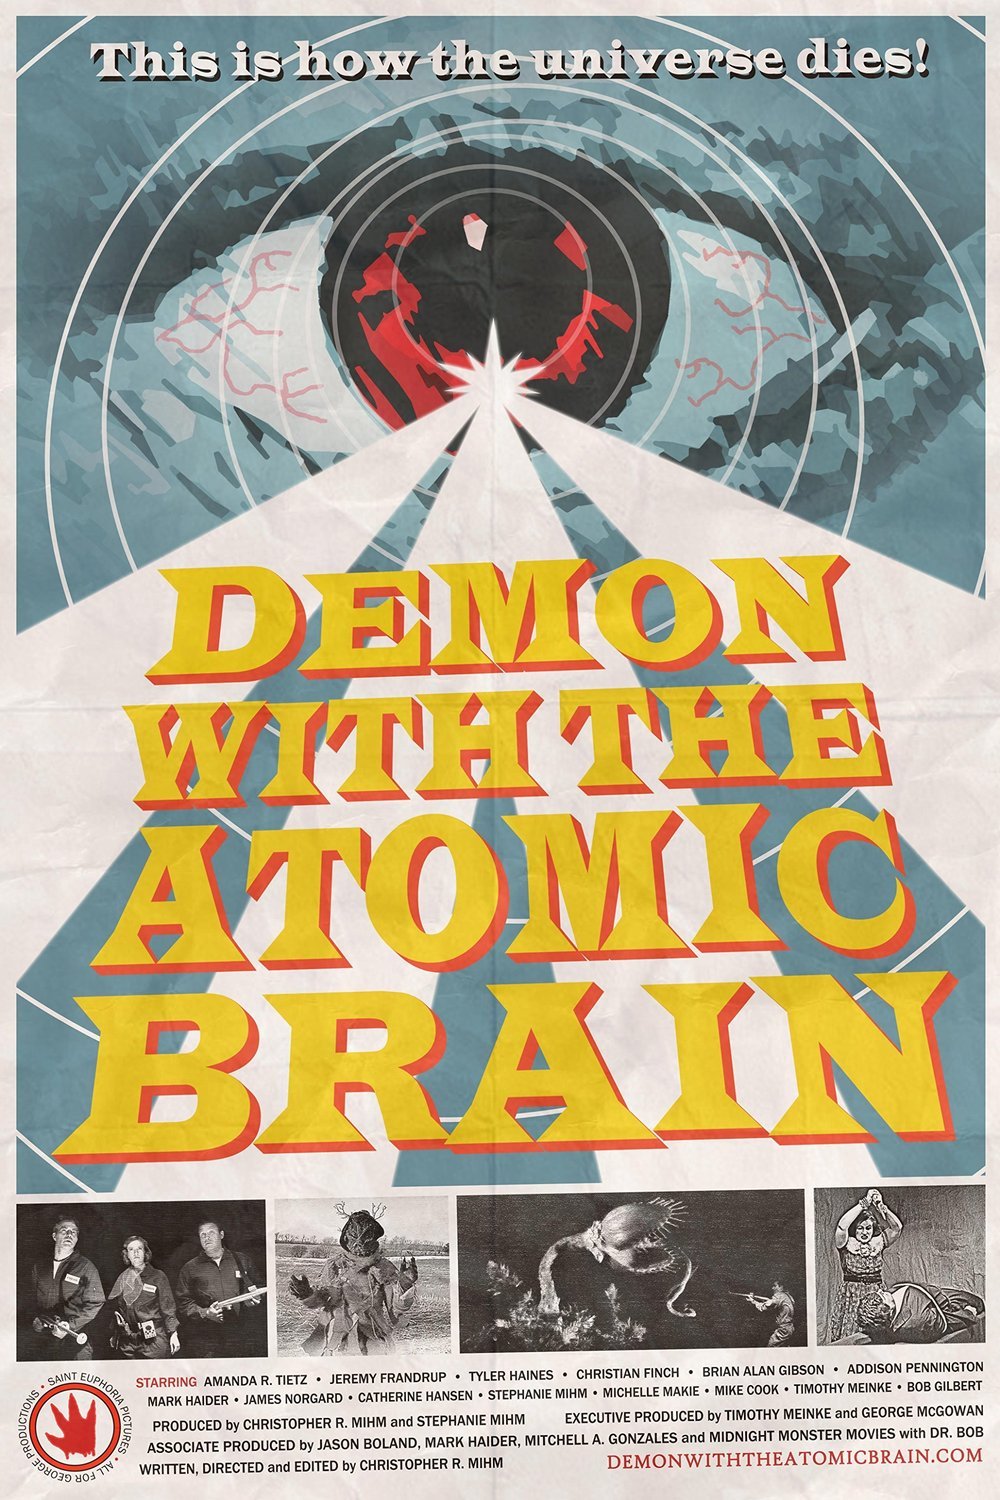 Poster of the movie Demon with the Atomic Brain